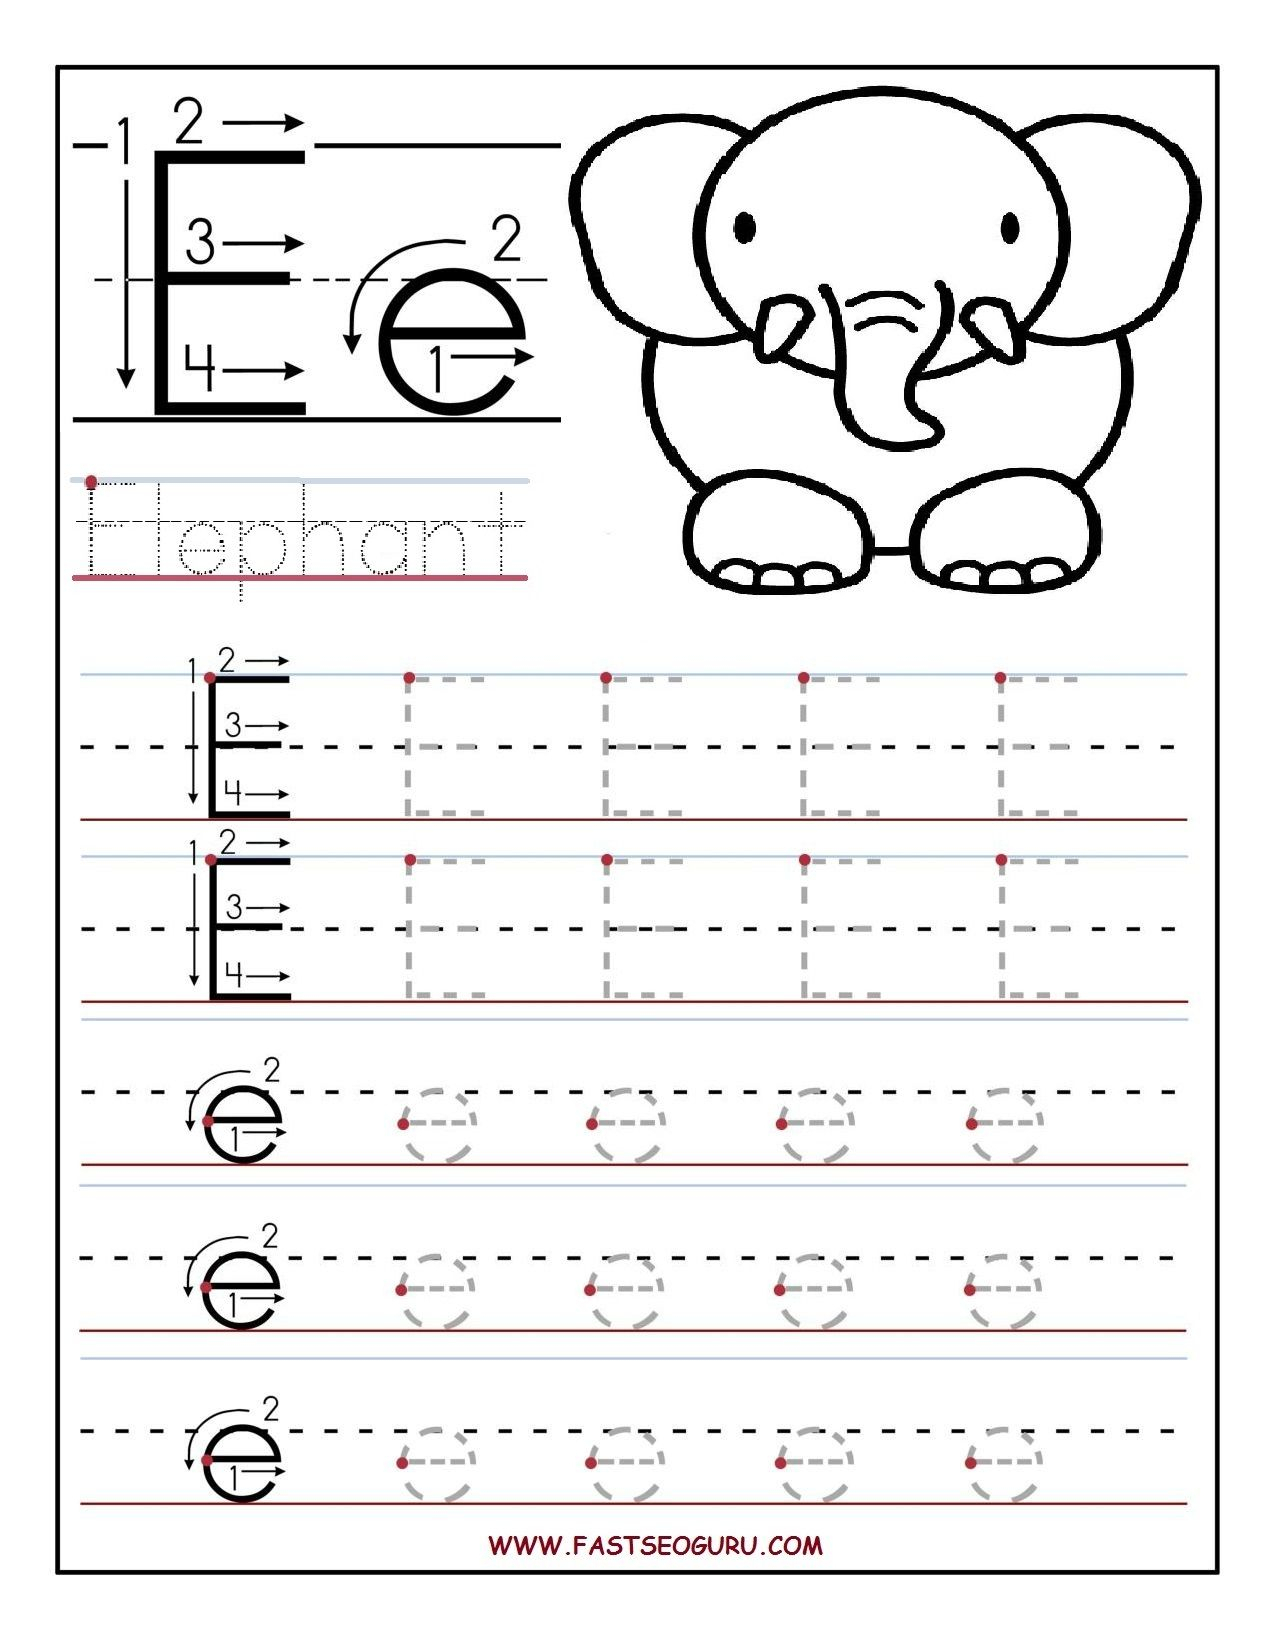 Pinvilfran Gason On Decor | Letter Tracing Worksheets throughout E Letter Worksheets